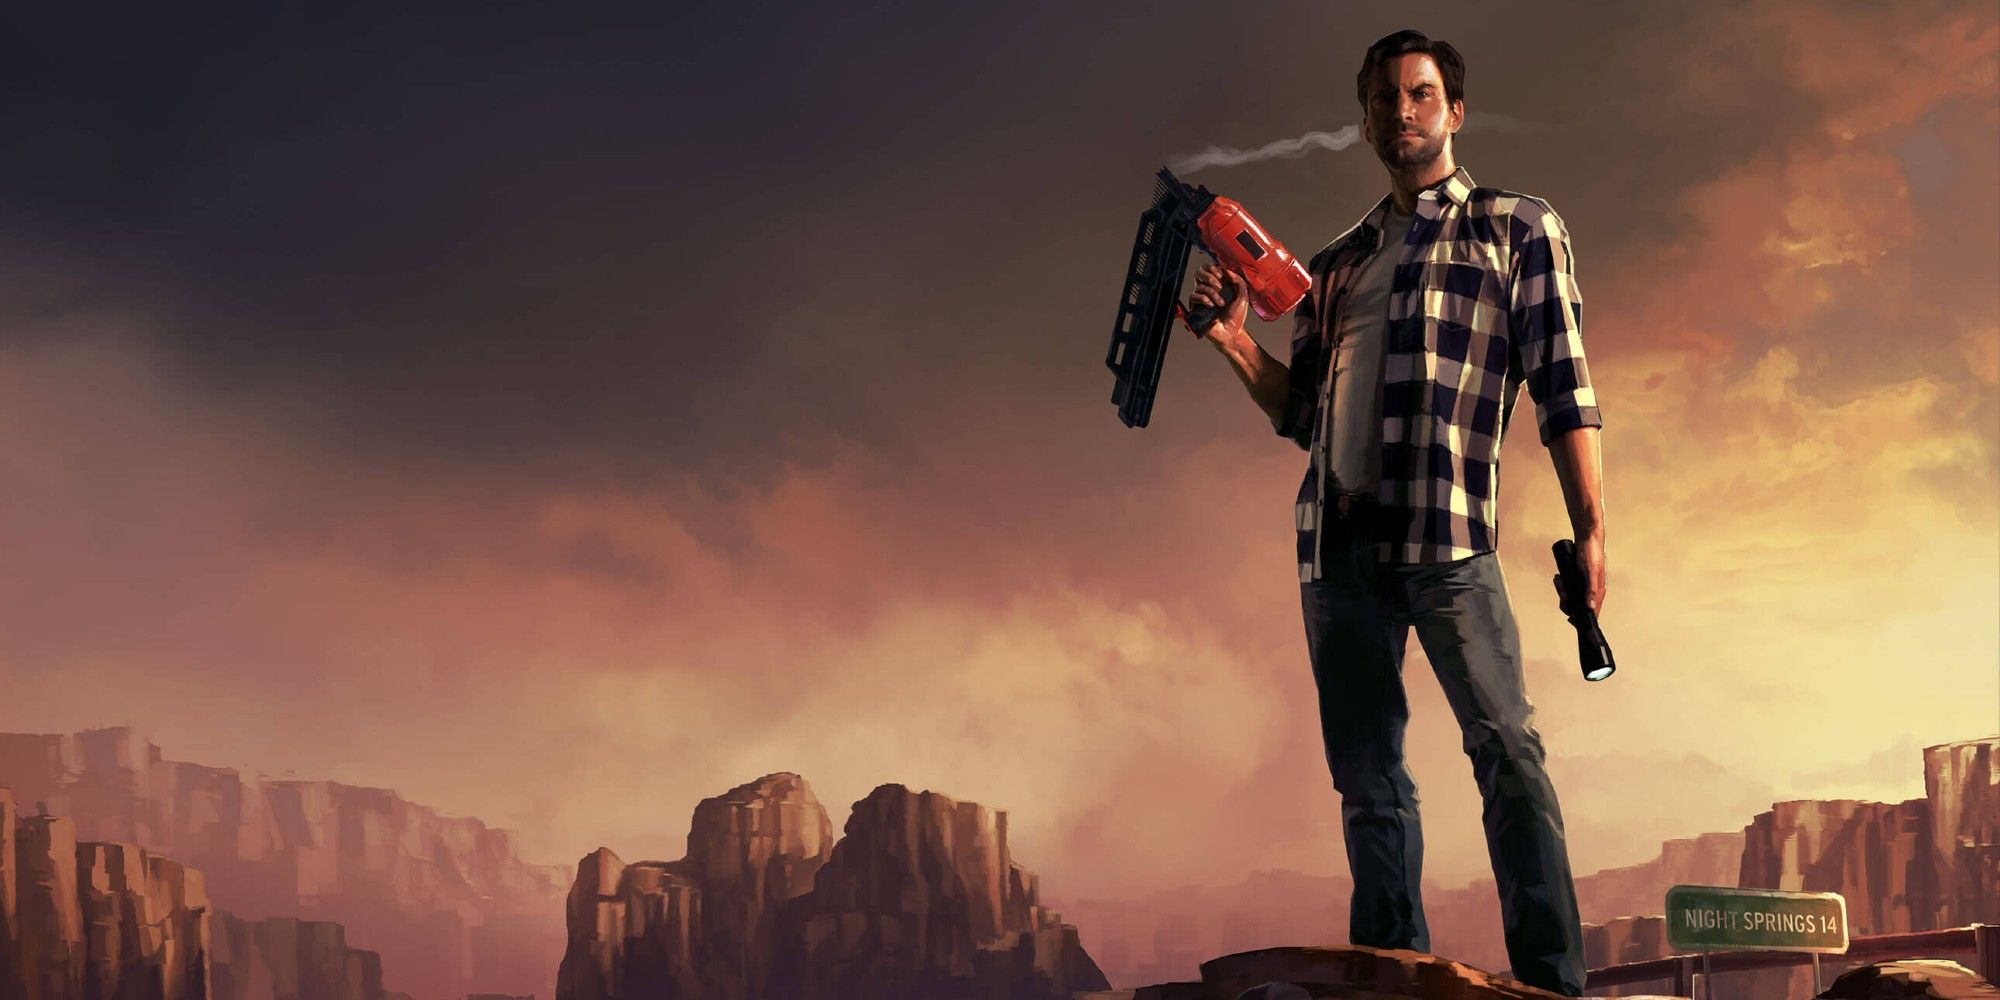 Alan Wake American Nightmare image showing titular character holding a weapon and a flashlight